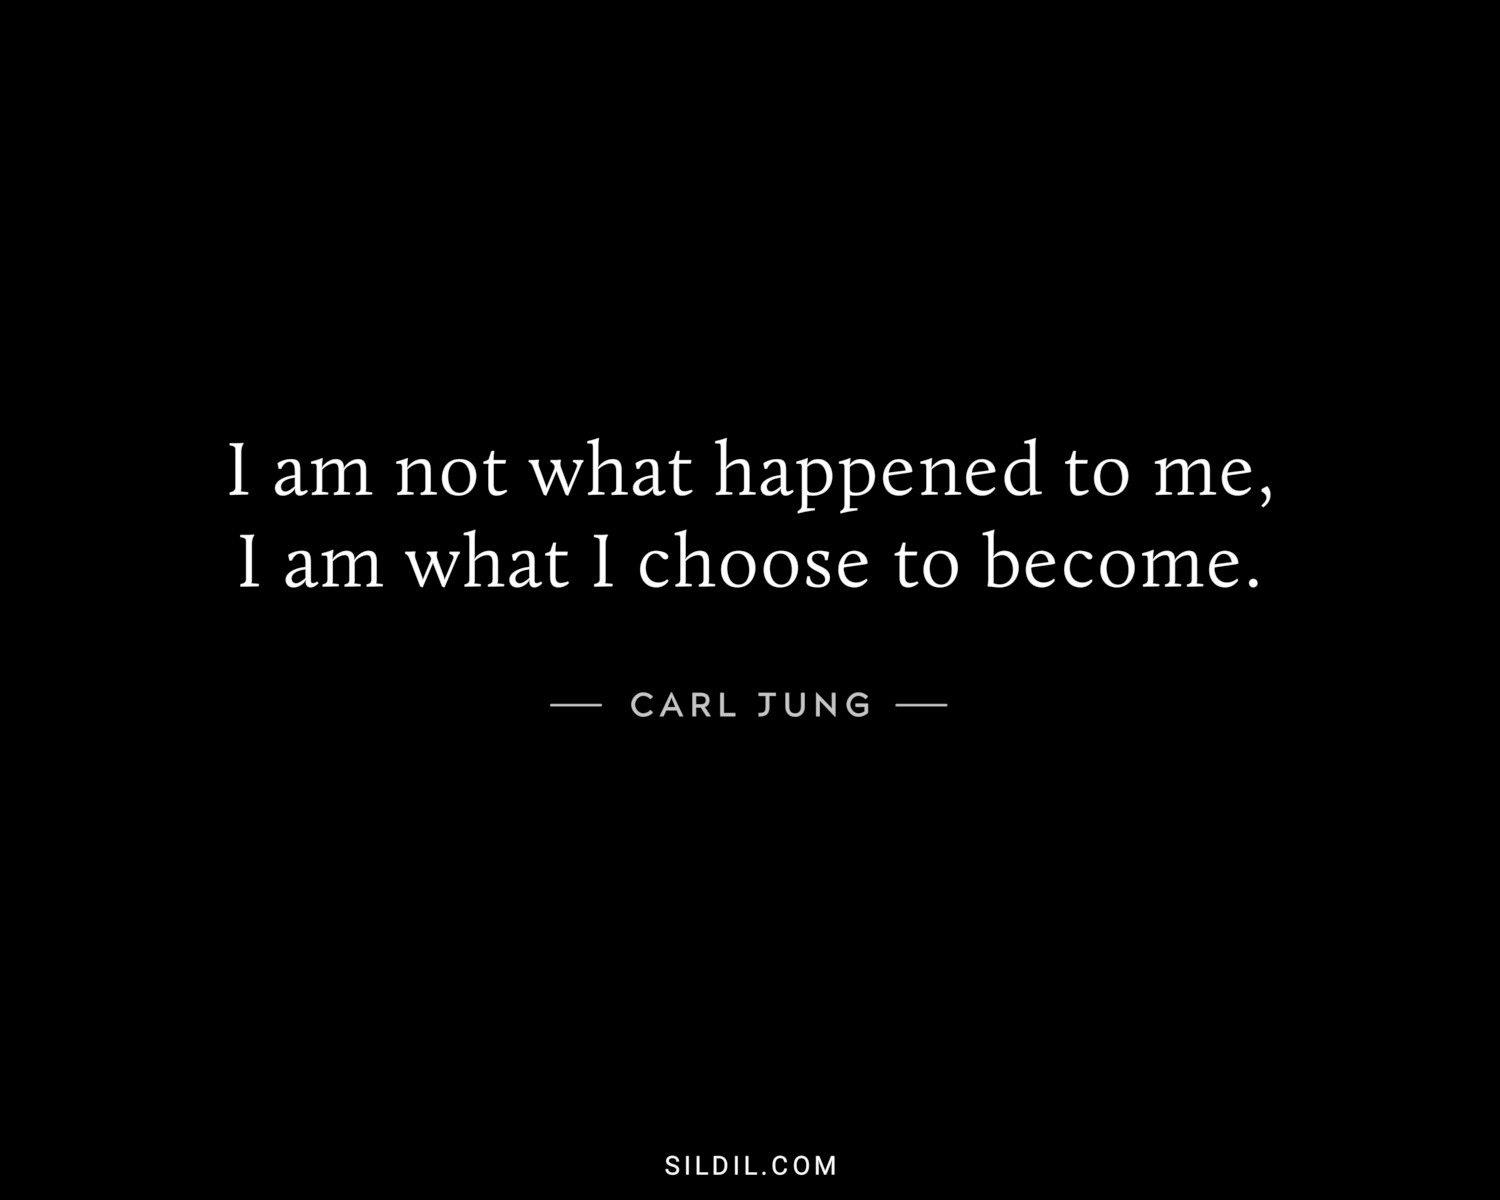 I am not what happened to me, I am what I choose to become.